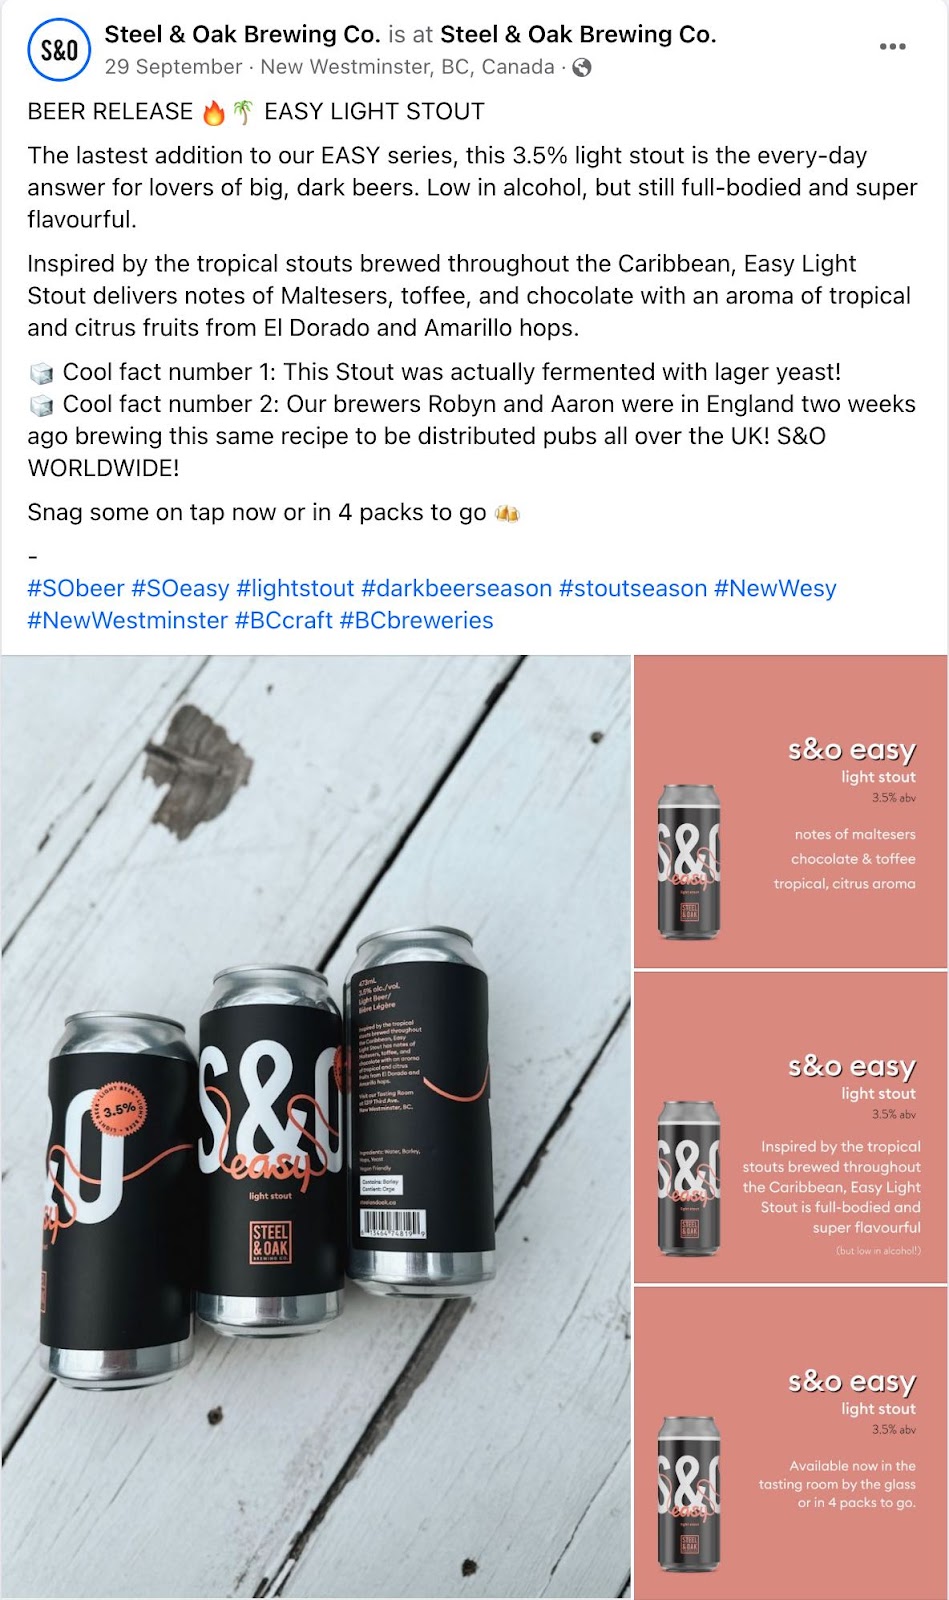 Steel & Oak's Facebook station  connected  launching a caller   stout